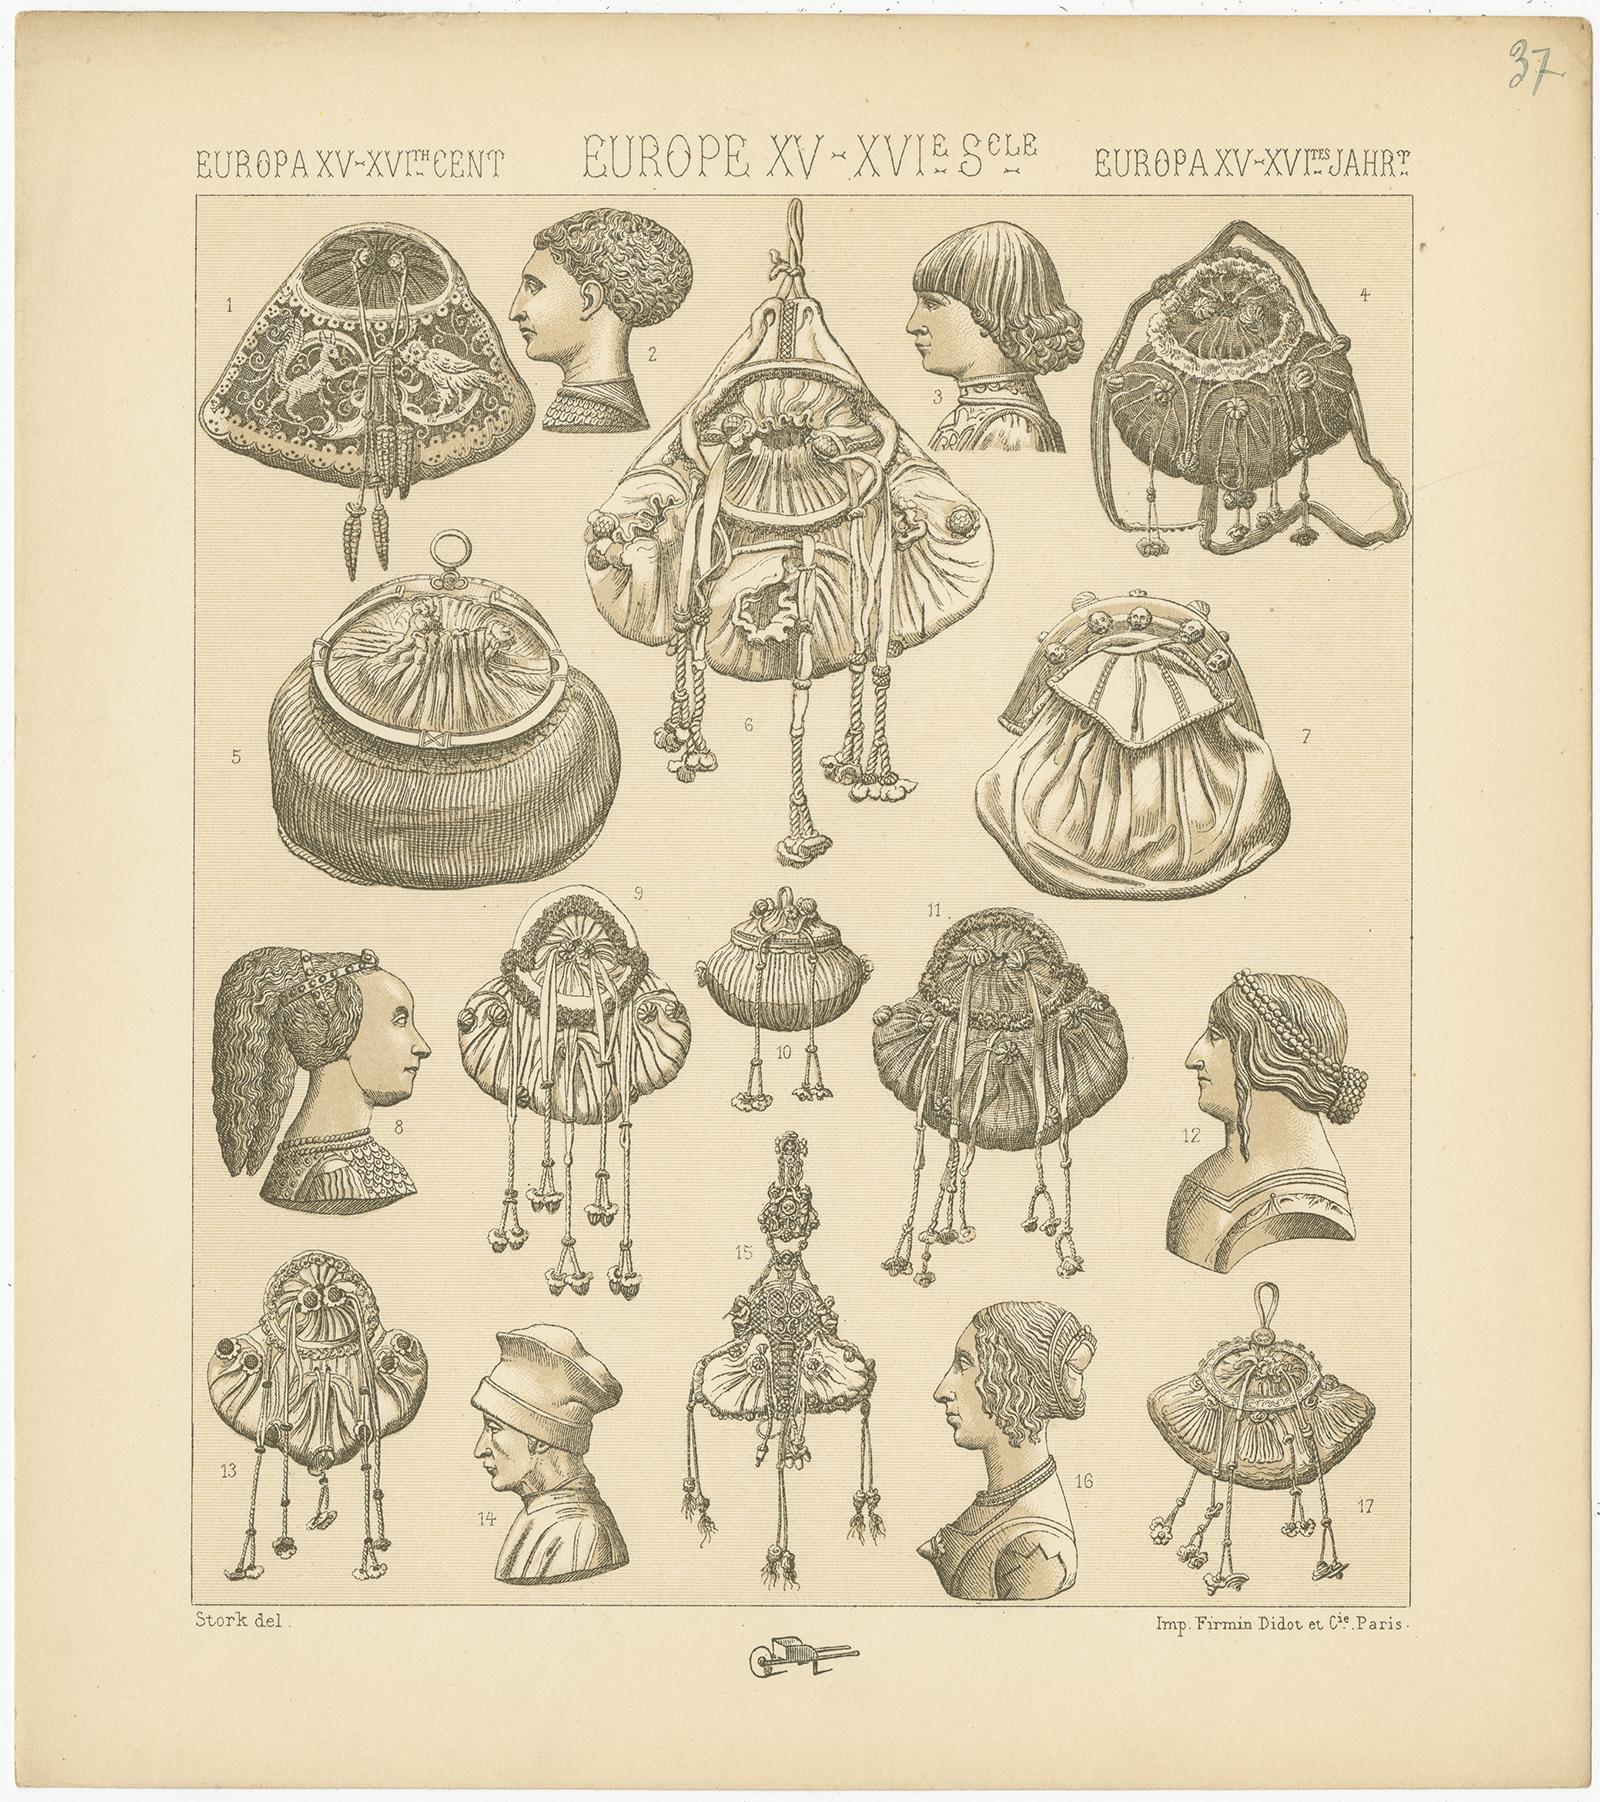 Antique print titled 'Europa XV-XVIth Cent - Europe XV-XVIe, Sele - Europa XV-XVItes Jahr'. Chromolithograph of European 15th-16th century decorative objects. This print originates from 'Le Costume Historique' by M.A. Racinet. Published, circa 1880.